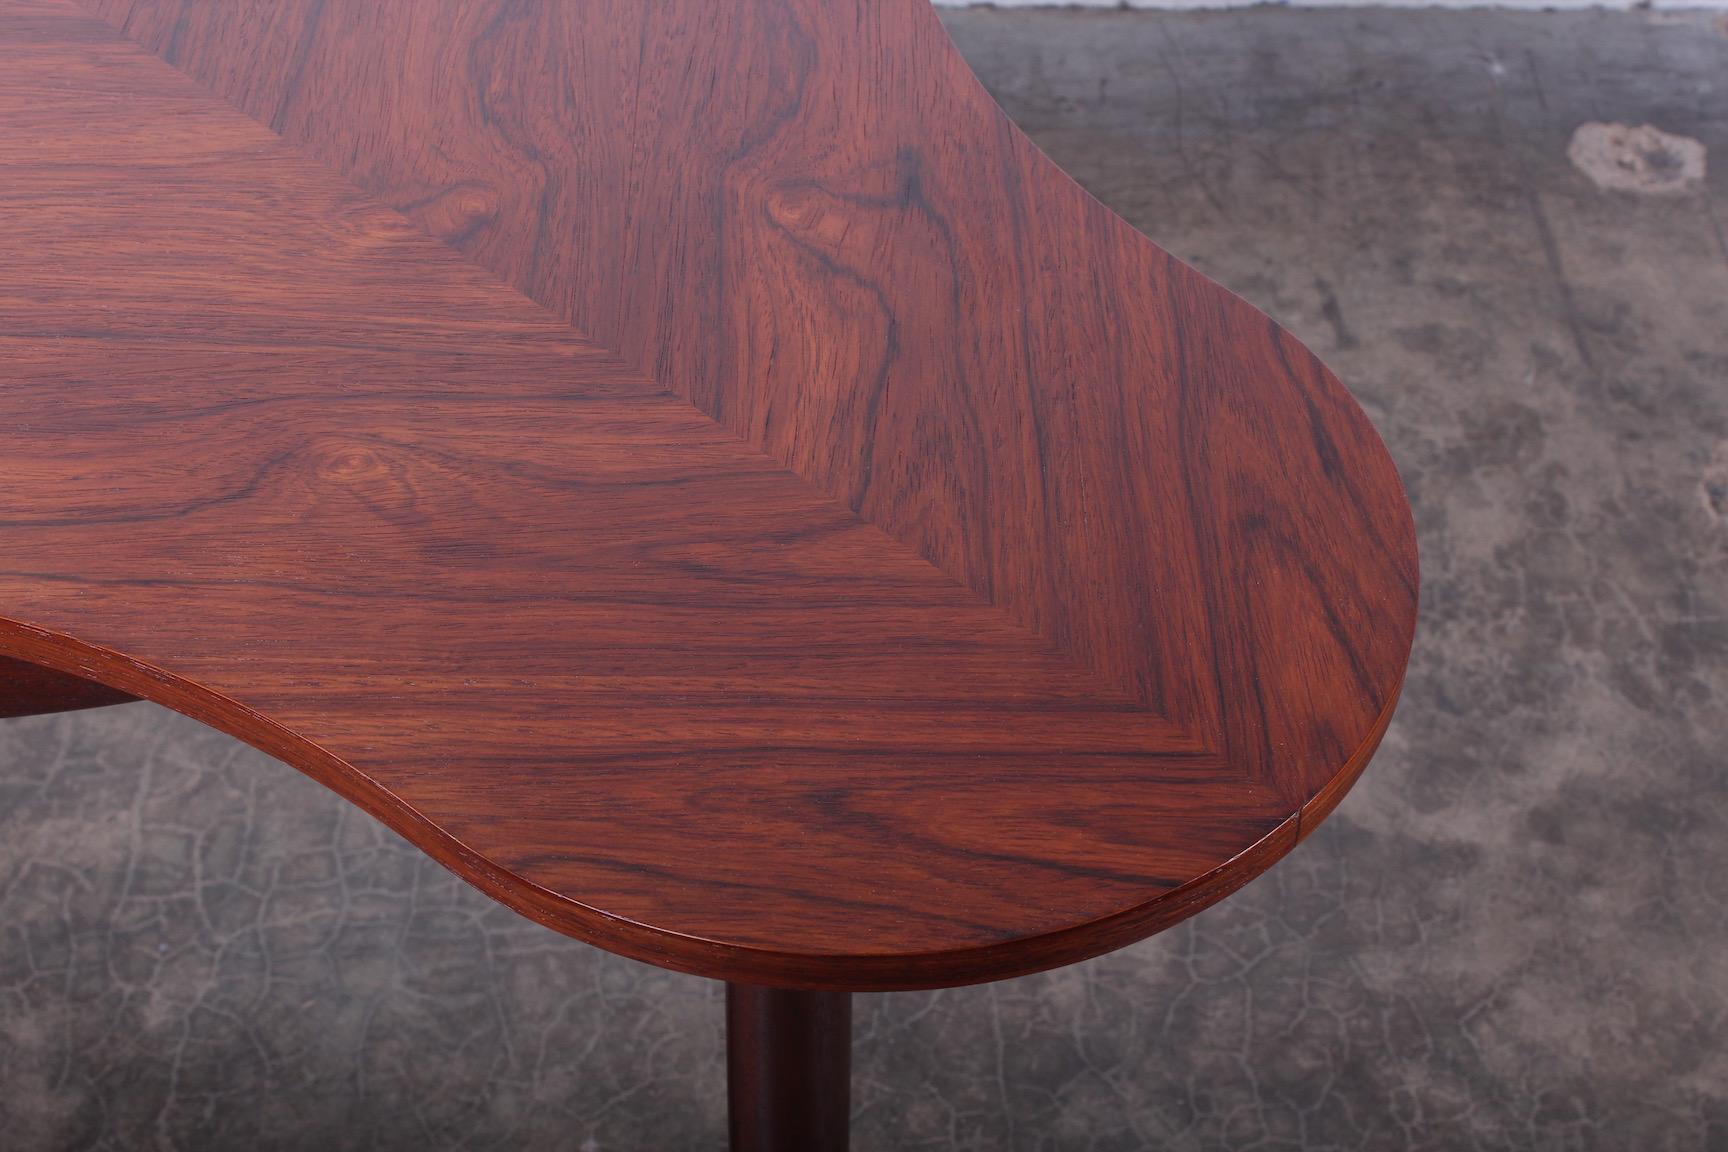 Mid-20th Century Rosewood Clover Table by Edward Wormley for Dunbar